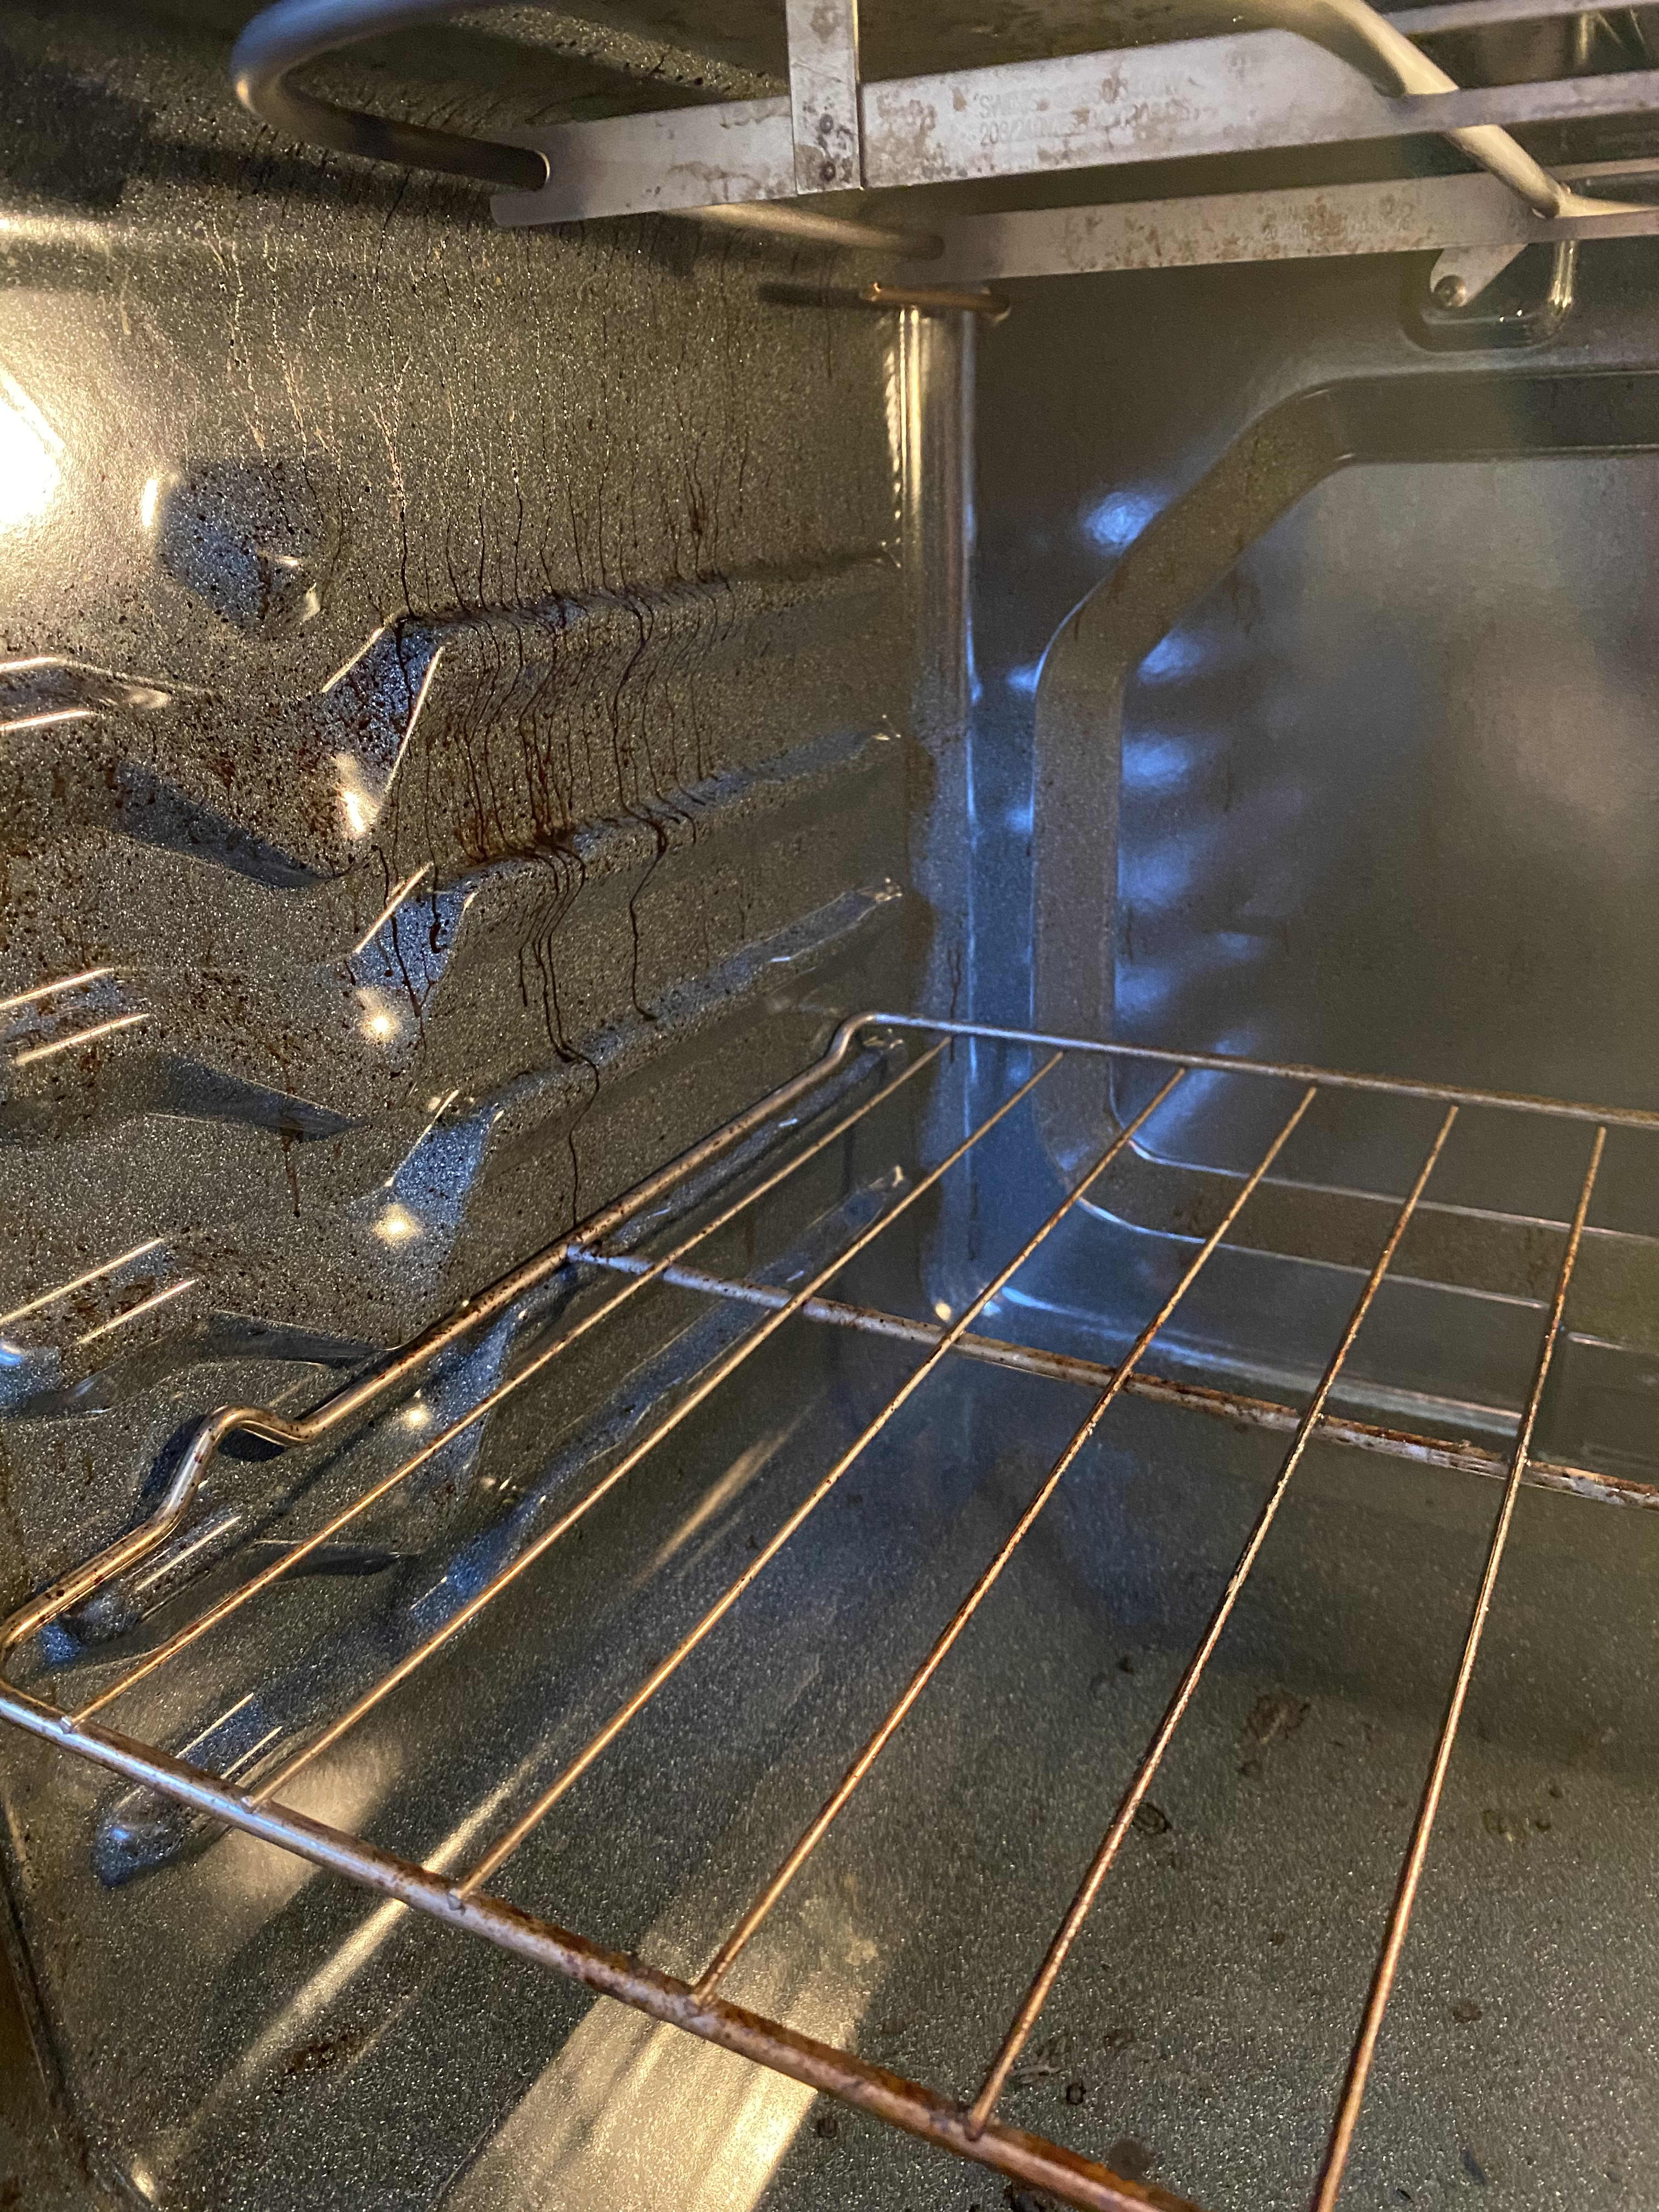 I Cleaned My Oven with Steamed Water and Vinegar — Here's How It